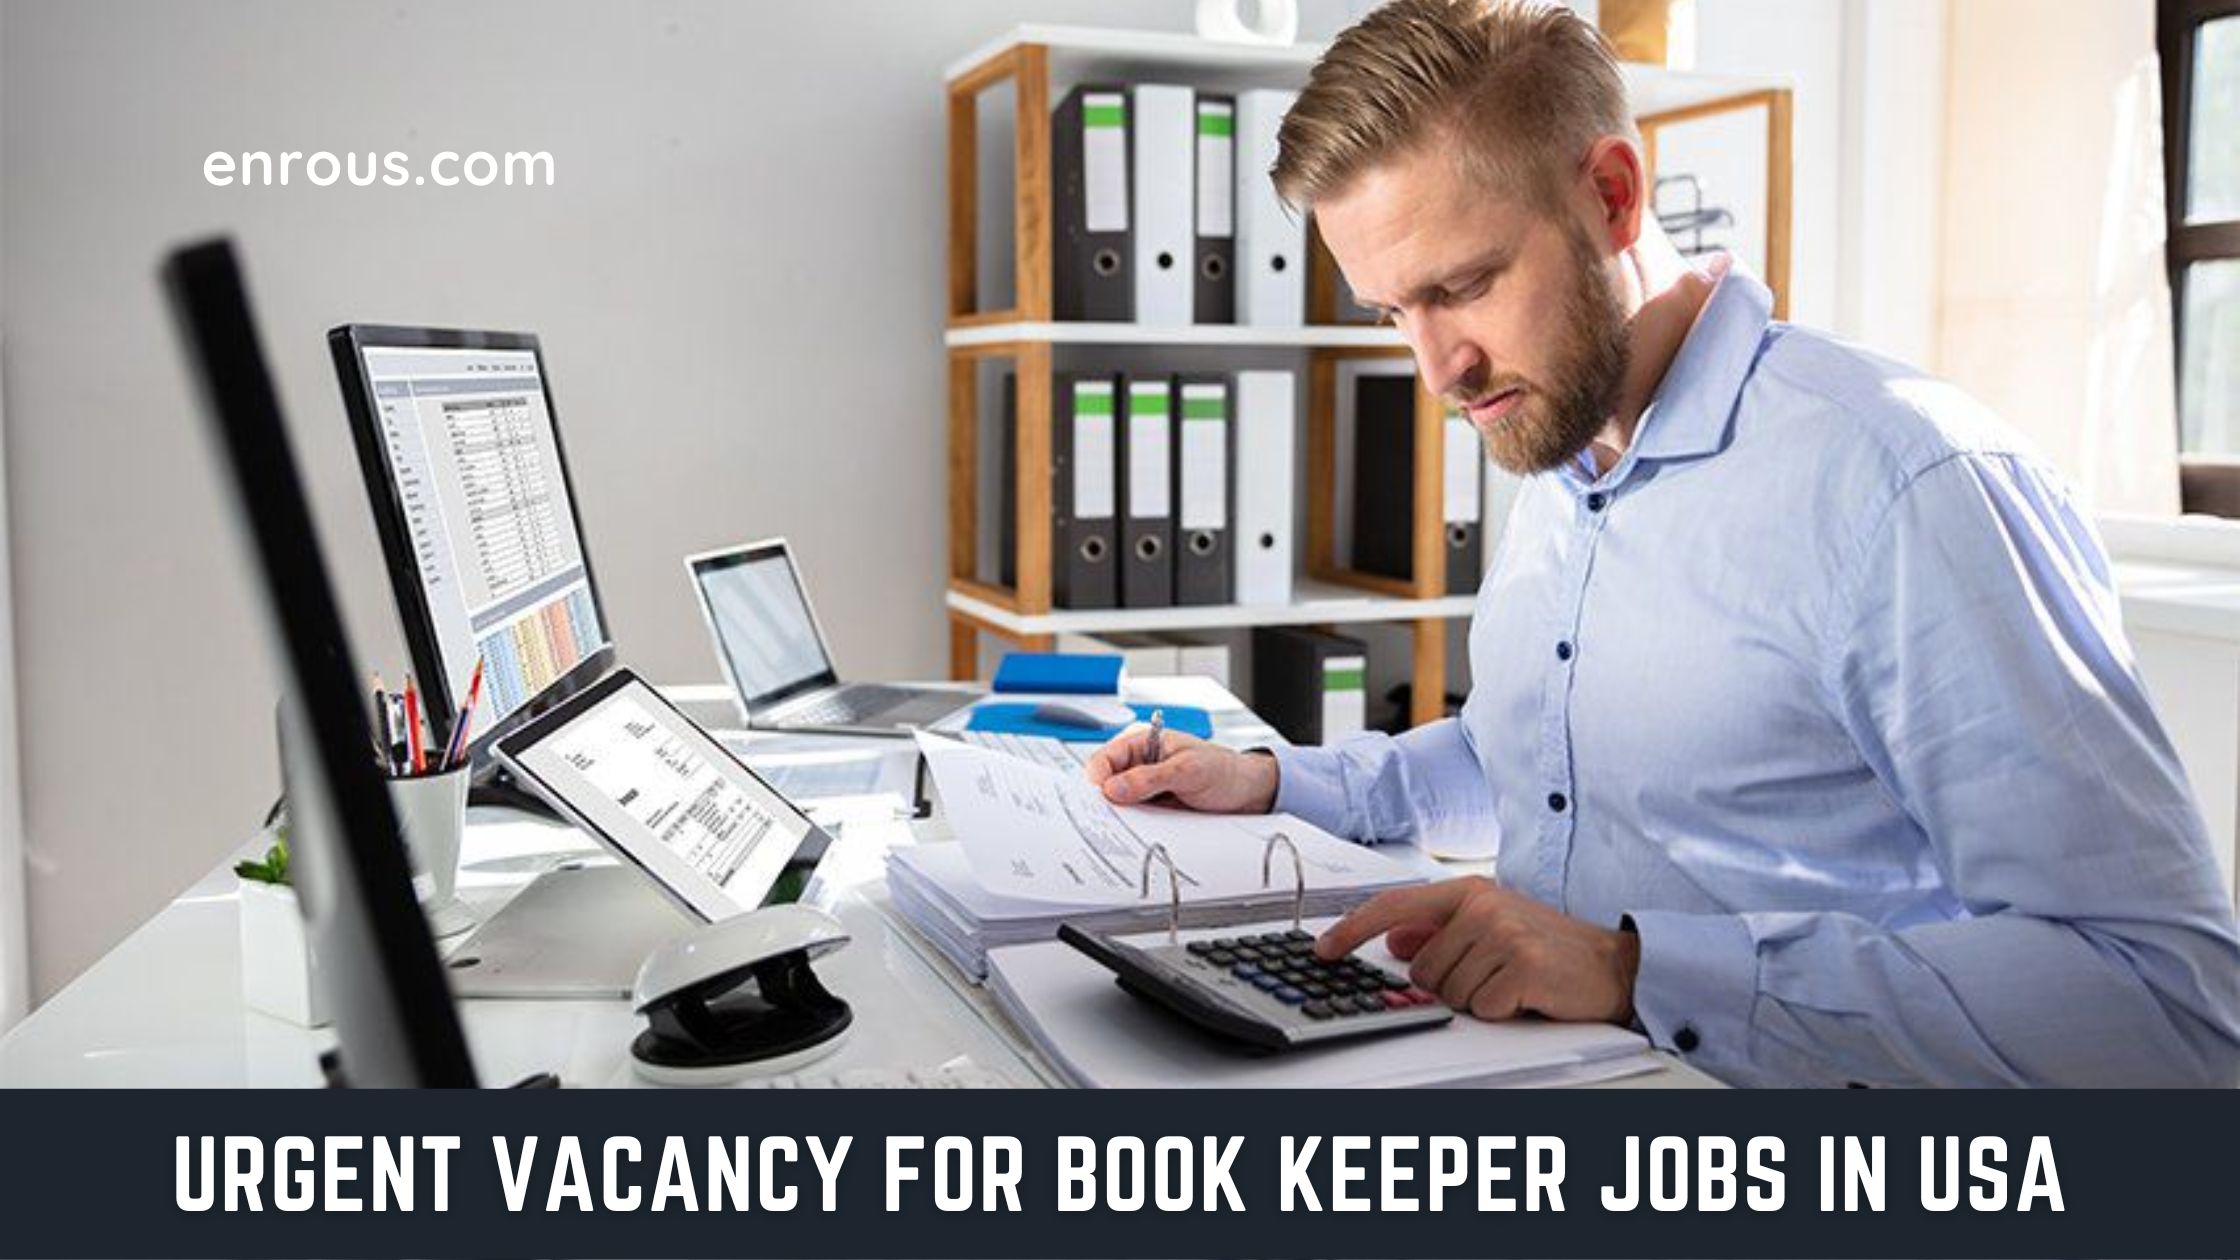 Urgent Vacancy For Book Keeper Jobs in USA